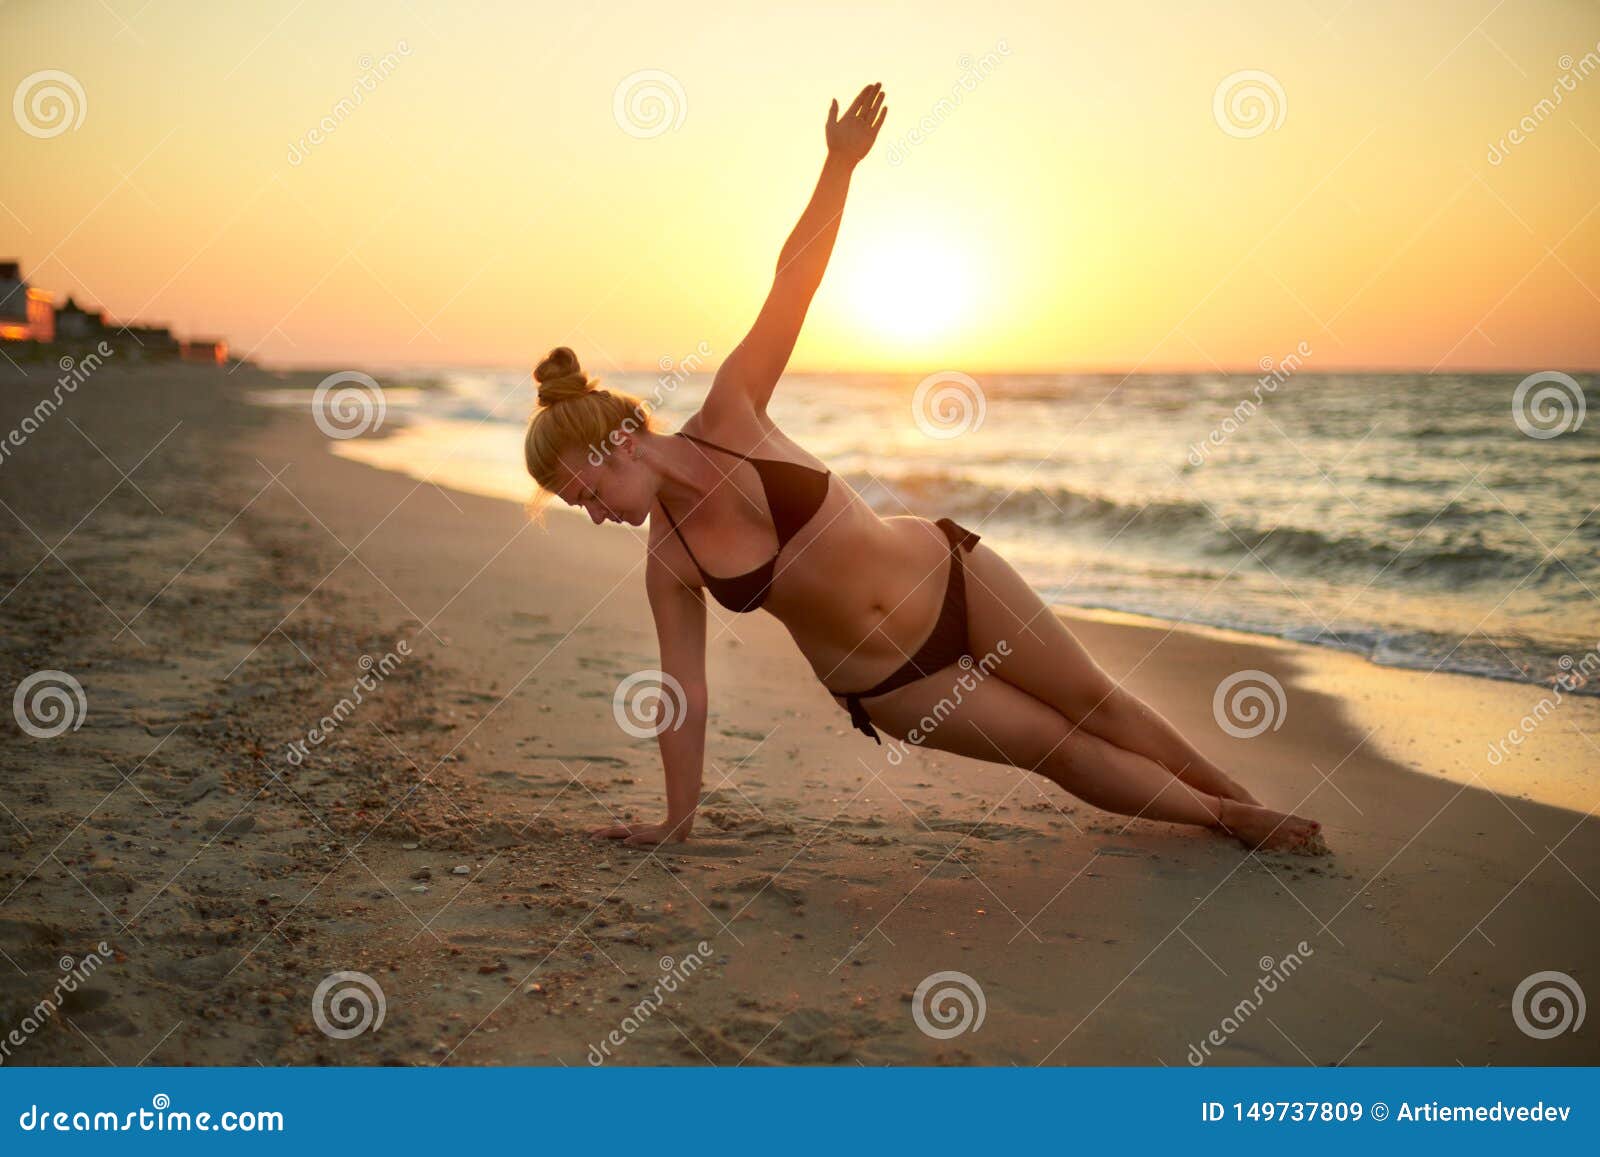 authentic woman in swimsuit doing yoga vasisthasana on the beach in the morning. real unretouched  girl silhouette